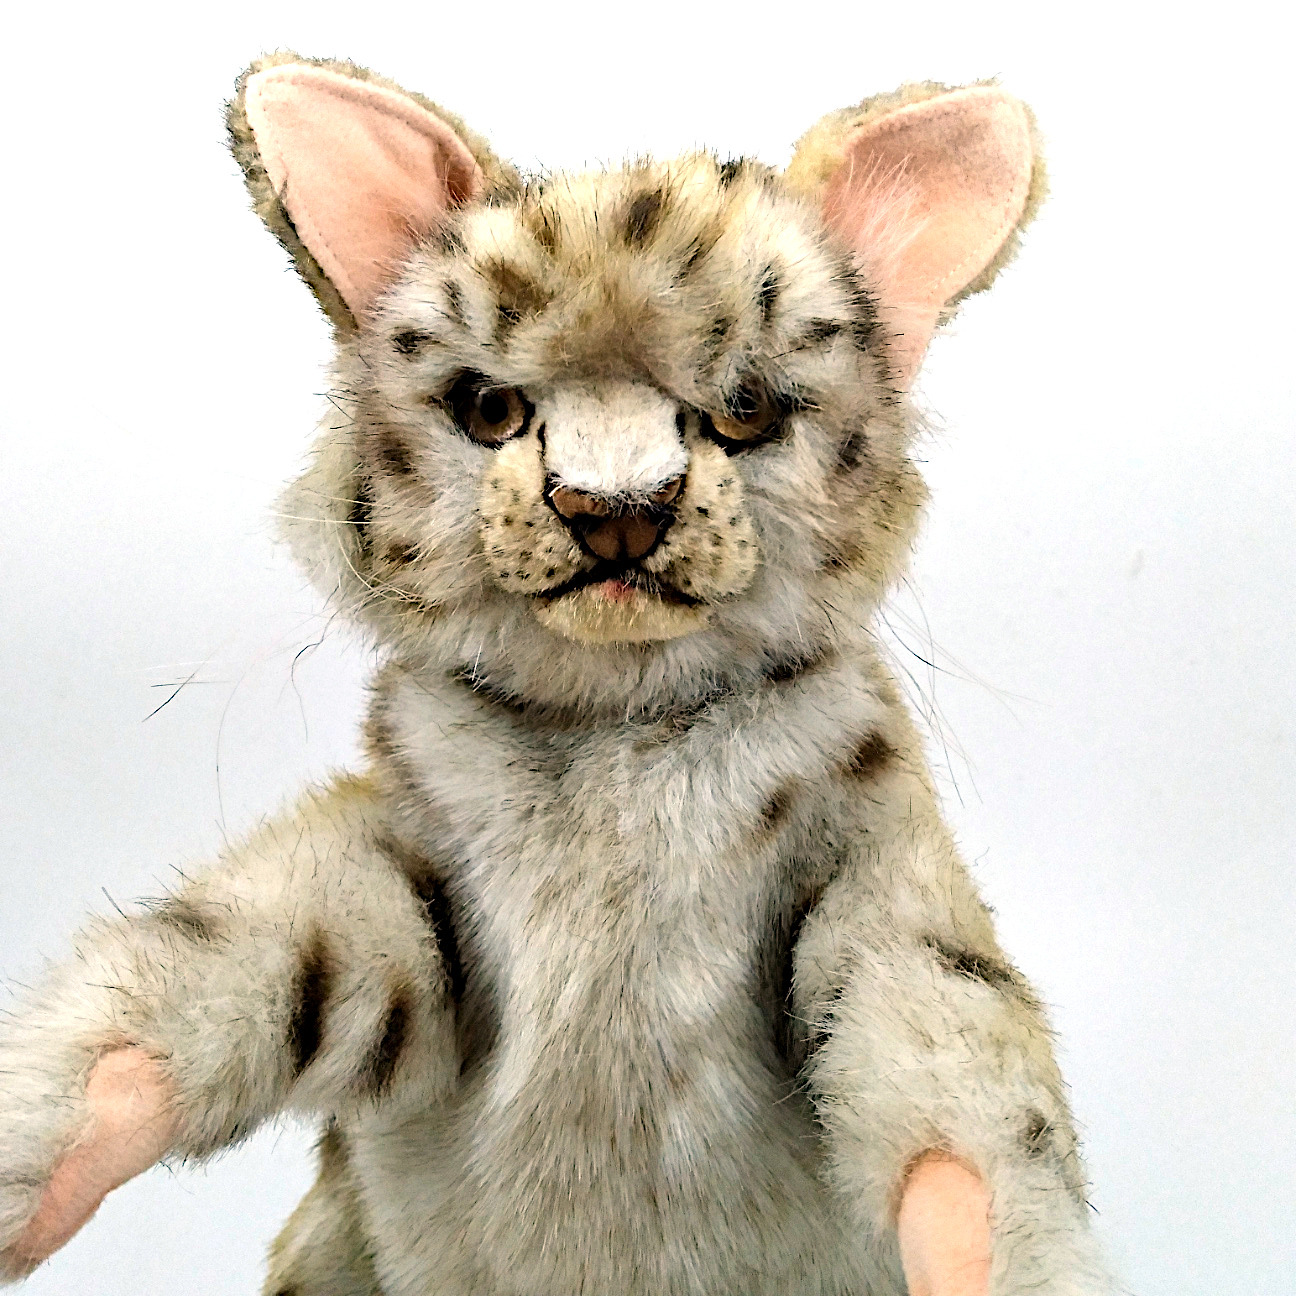 This Leopard Hand Puppet by Hansa True to Life Look Soft Plush Animal Learning Toy is made with love by Premier Homegoods! Shop more unique gift ideas today with Spots Initiatives, the best way to support creators.